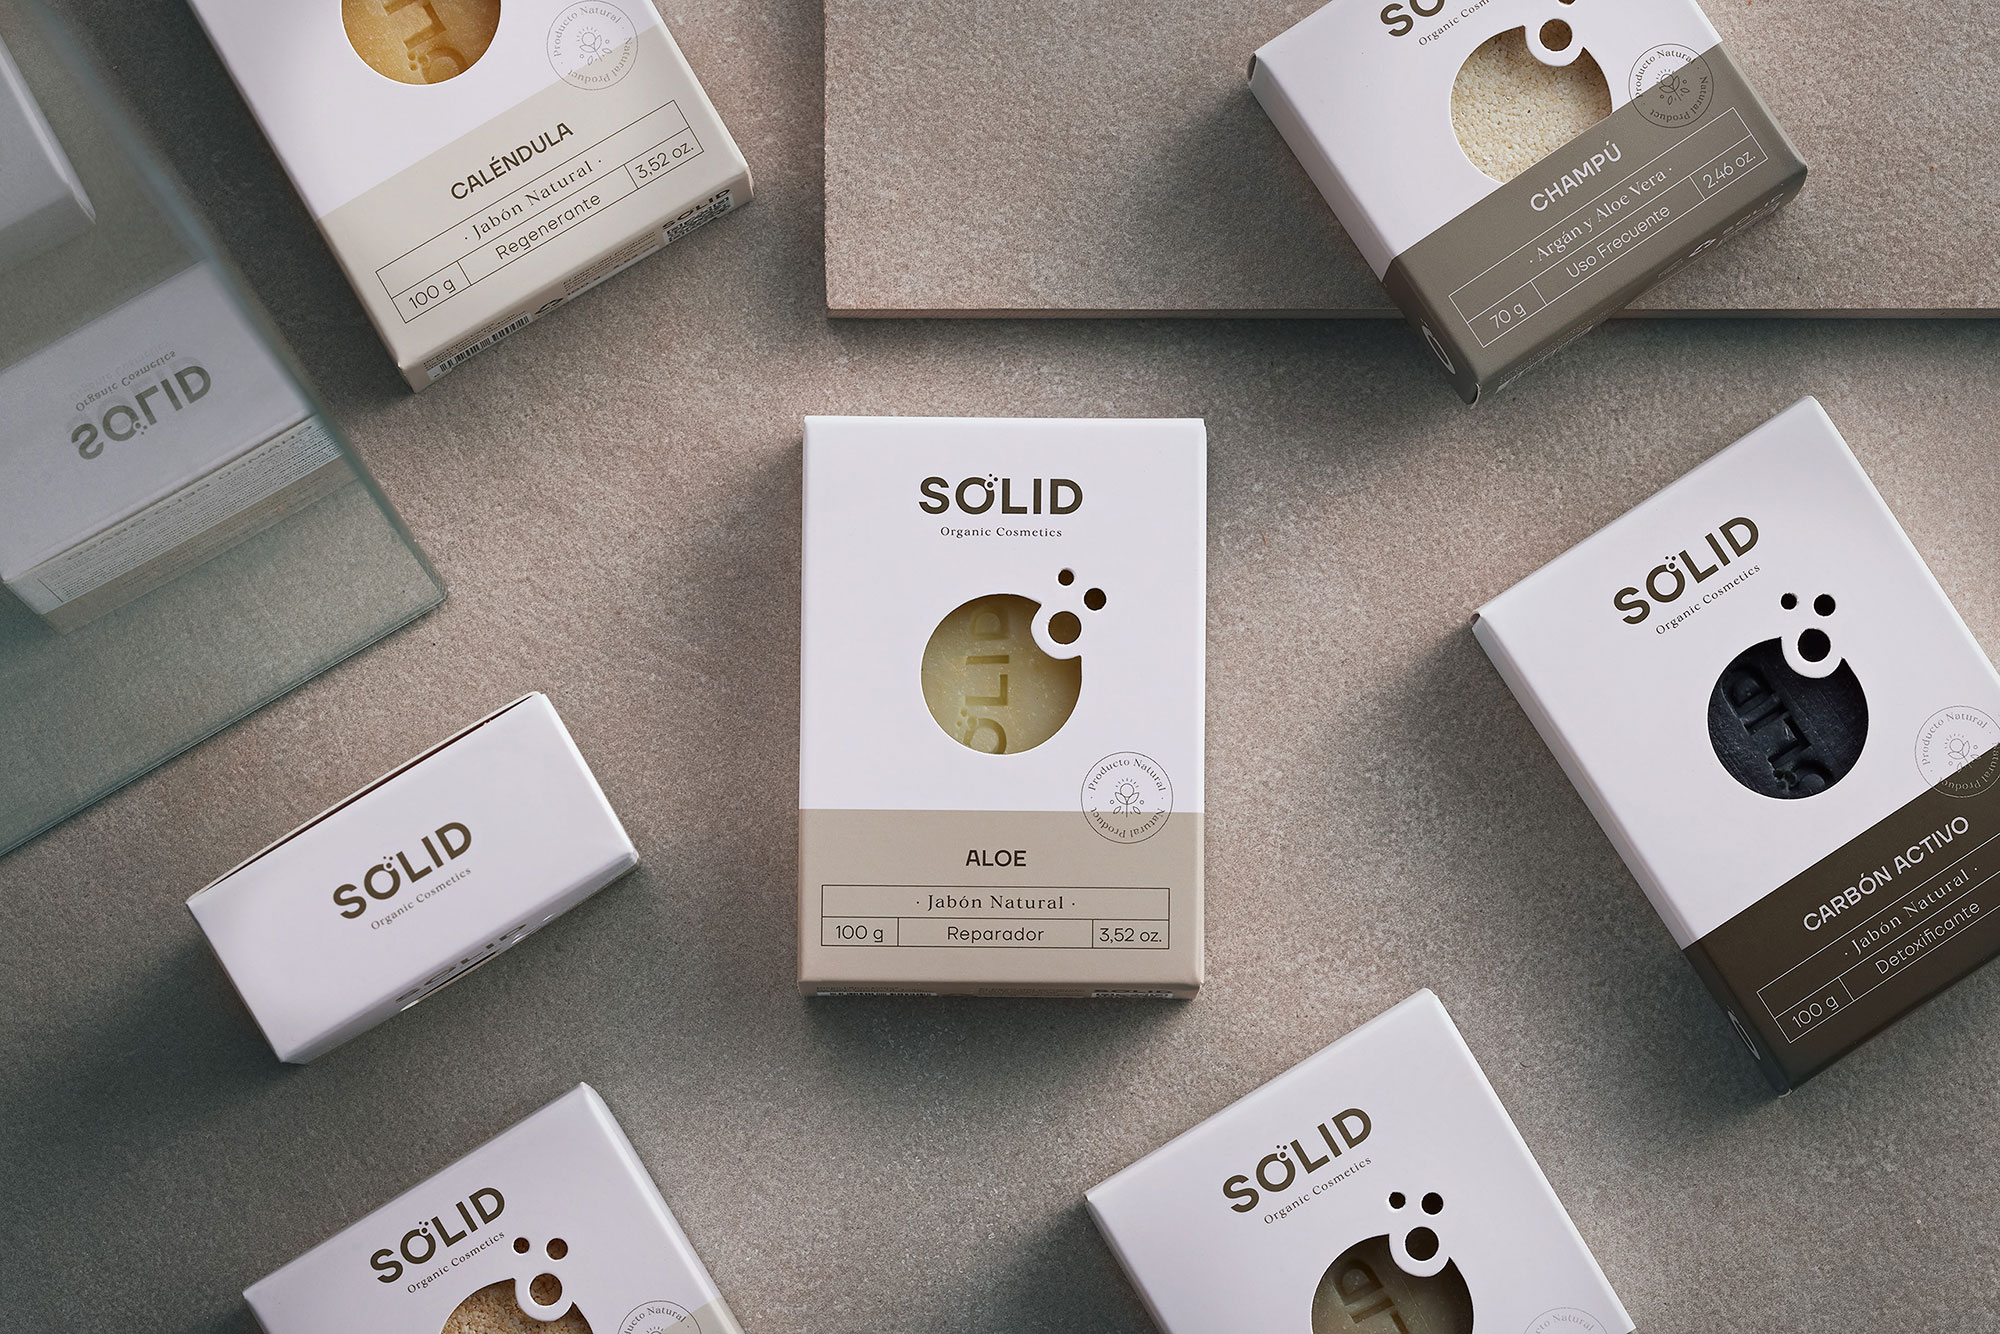 Creation of New Brand, Visual Identity and Packaging for Solid Soaps Designed by Bulldog Studio